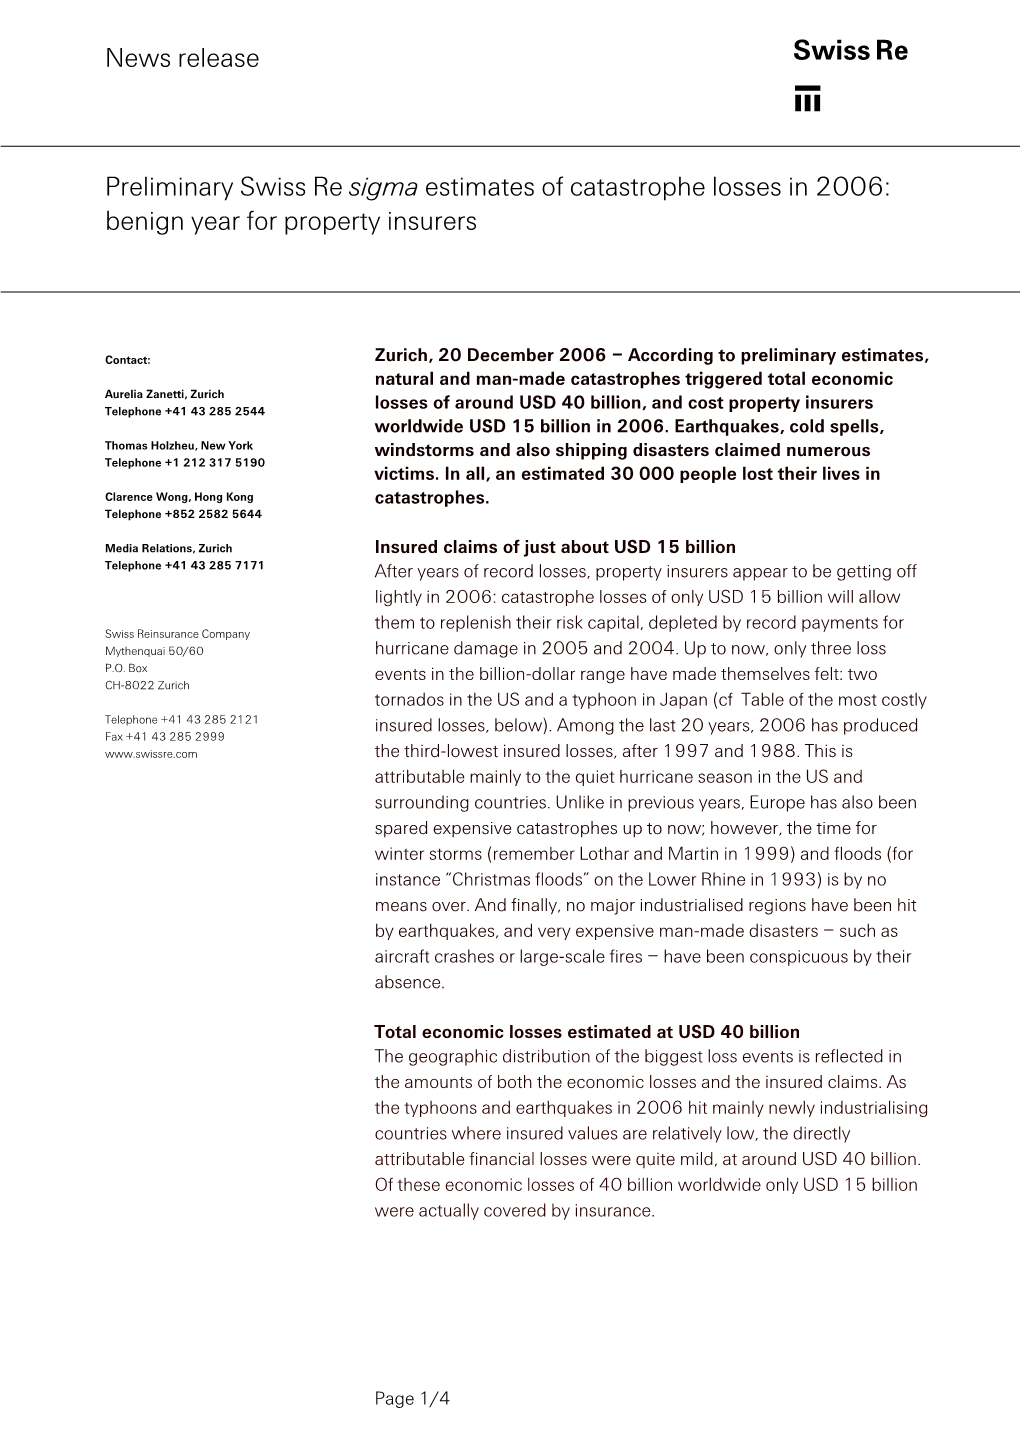 Preliminary Swiss Re Sigma Estimates of Catastrophe Losses in 2006: Benign Year for Property Insurers